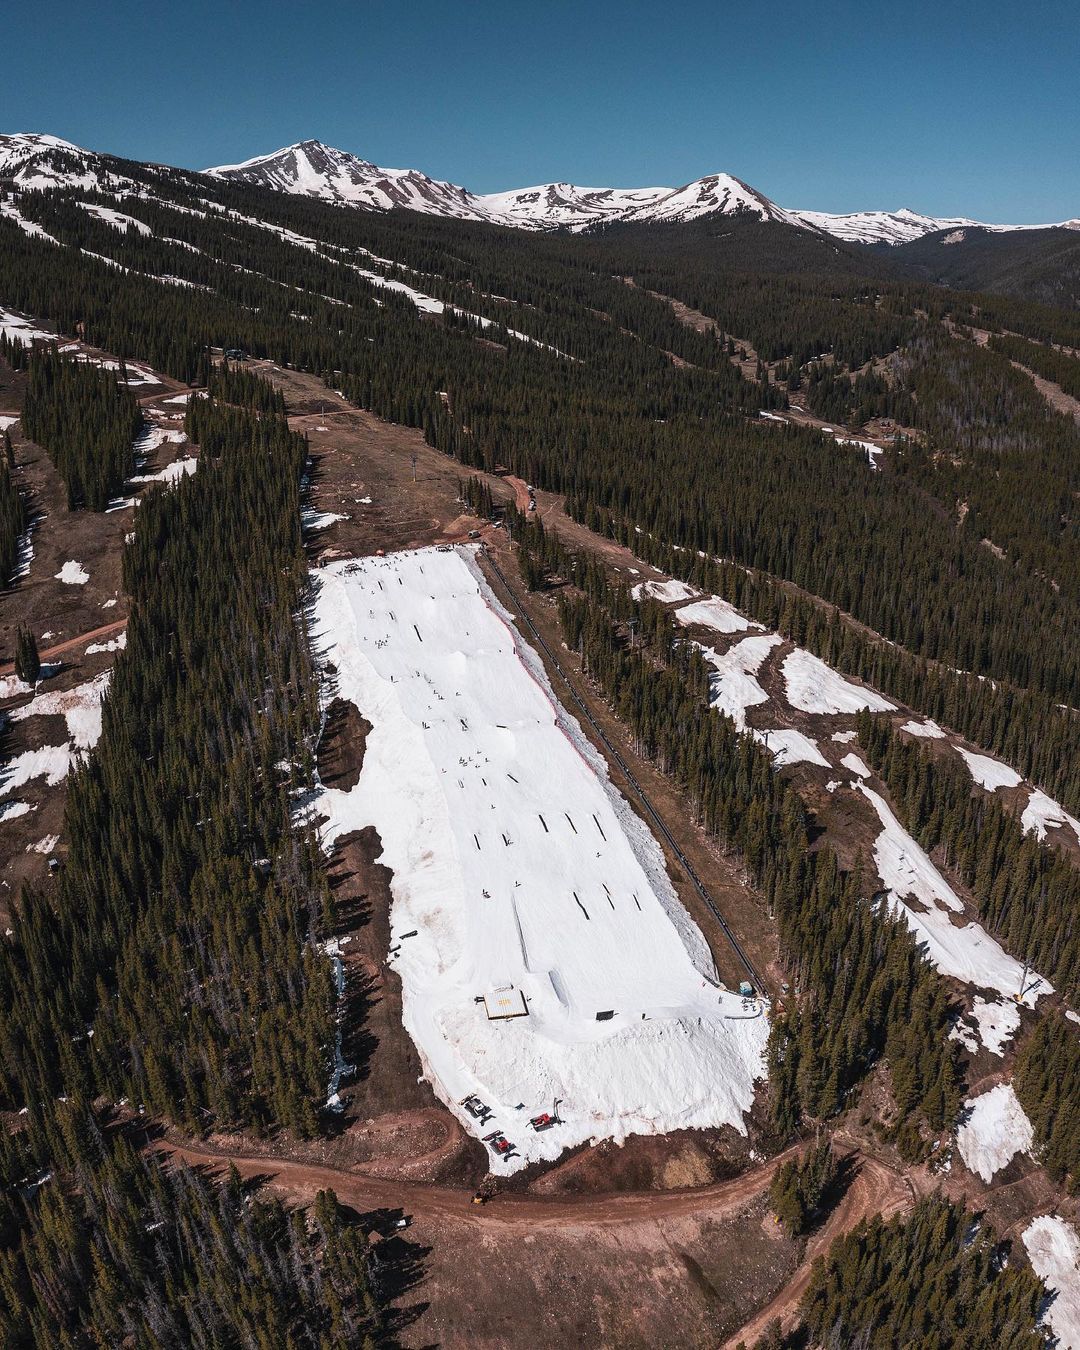 Central Park at Woodward Copper Mountain in Colorado offering summer skiing